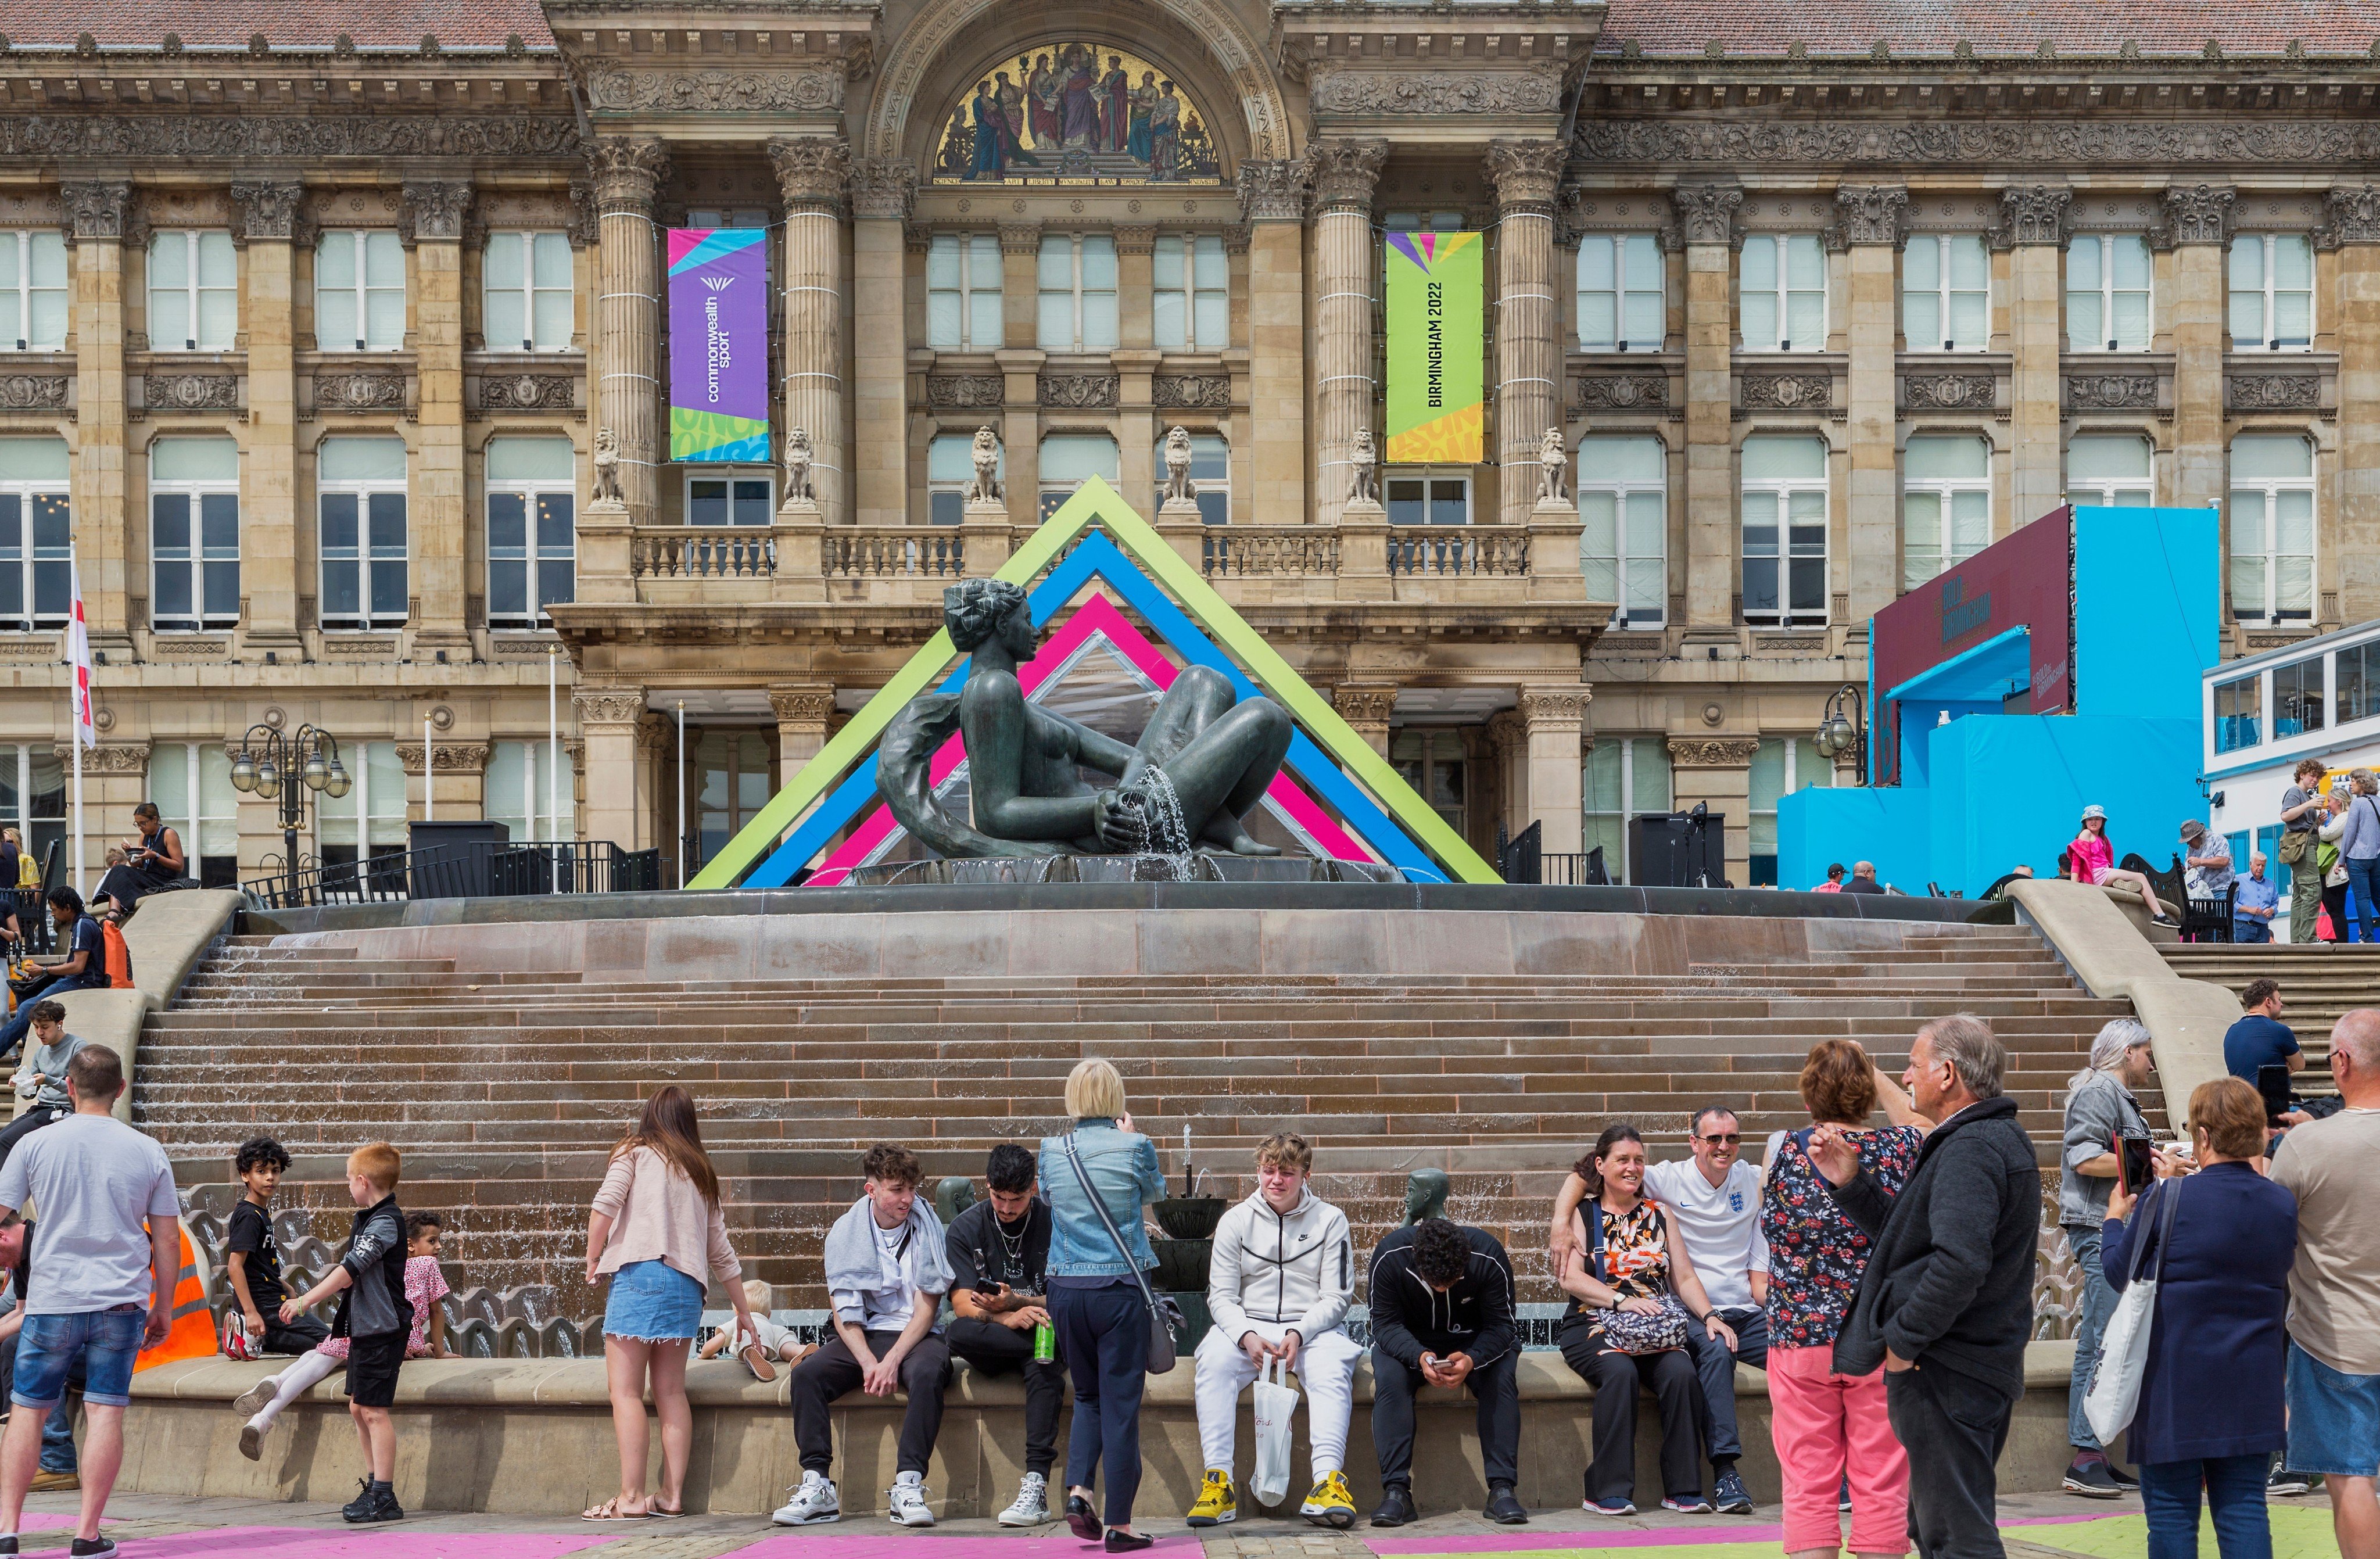 Visitors sit in front of The Floozie in the Jacuzzi and the Birmingham City Council House. Birmingham confirmed on Tuesday that the city is in financial distress. Photo: Shutterstock Images